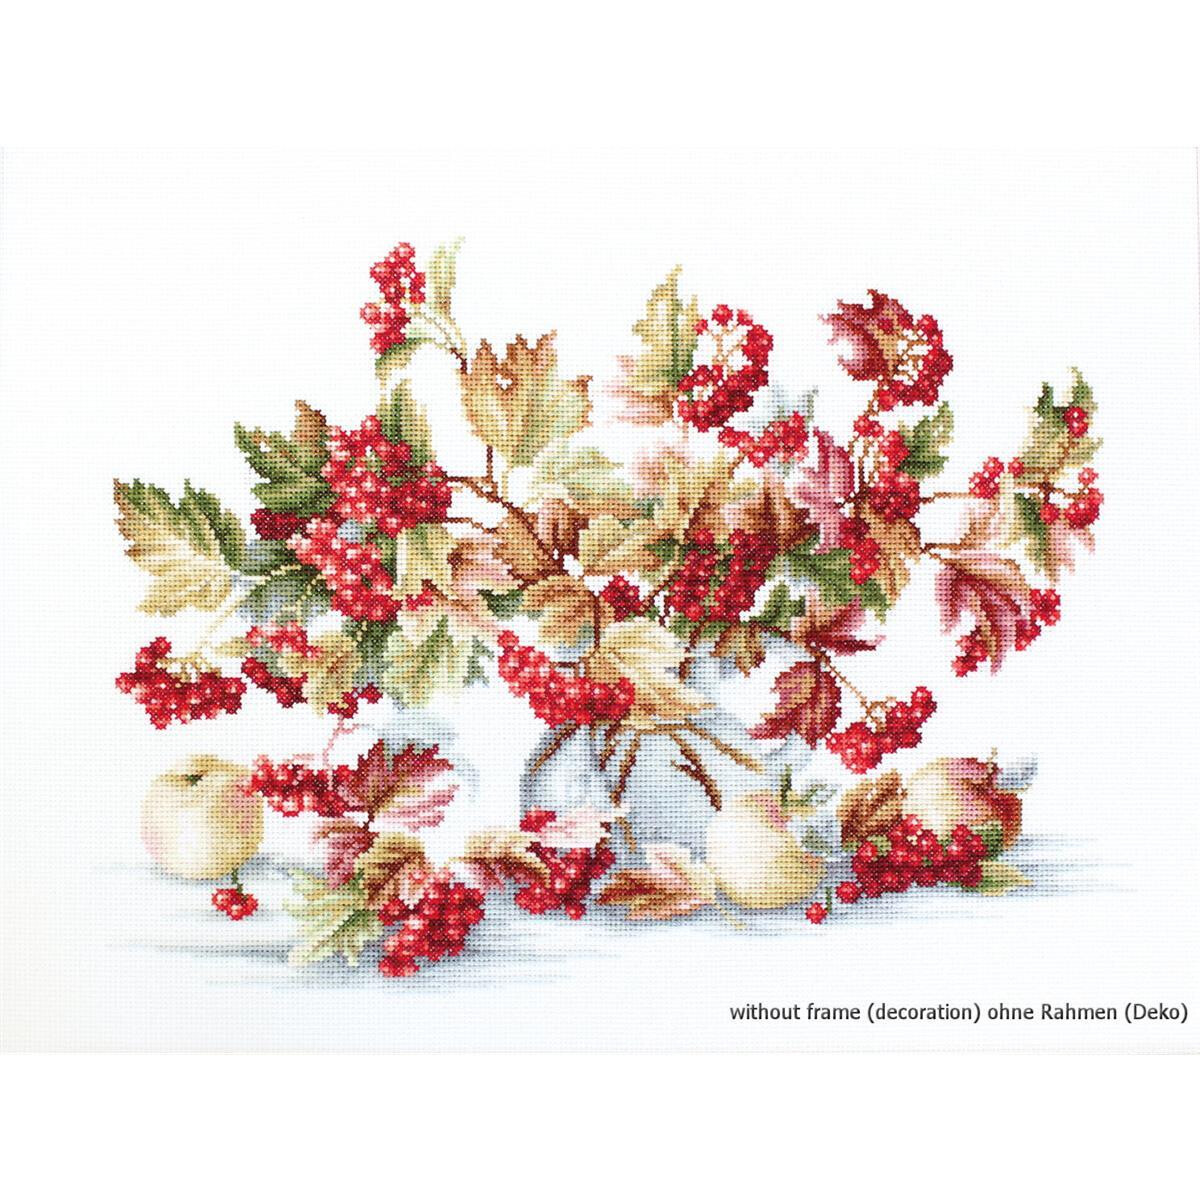 A cross-stitch design shows red berries and green leaves,...